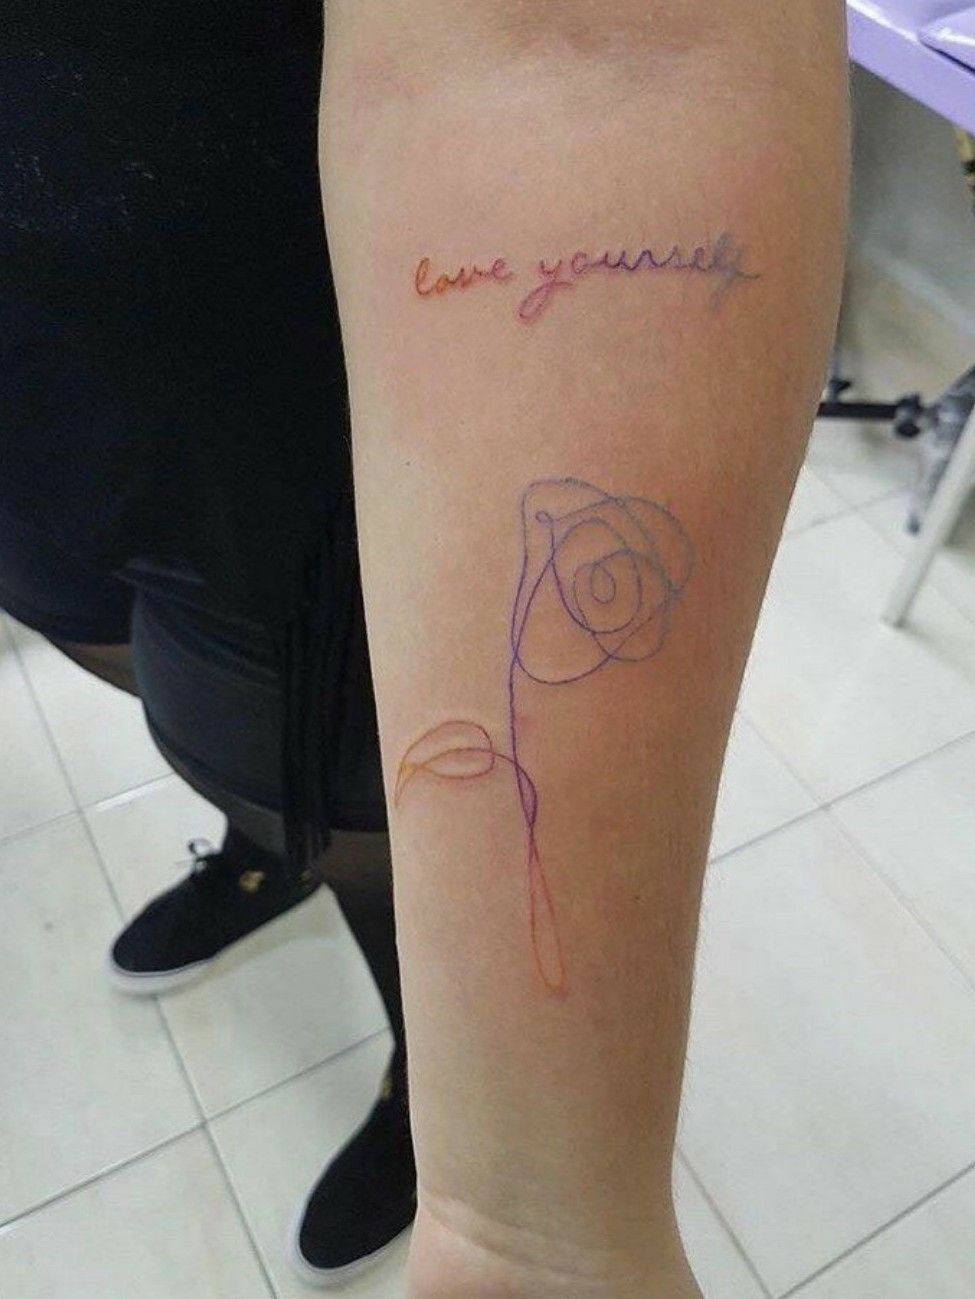 Tattoo uploaded by Savannah Humphries • BTS 'Love Yourself: 'Her' colored  tattoo • Tattoodo